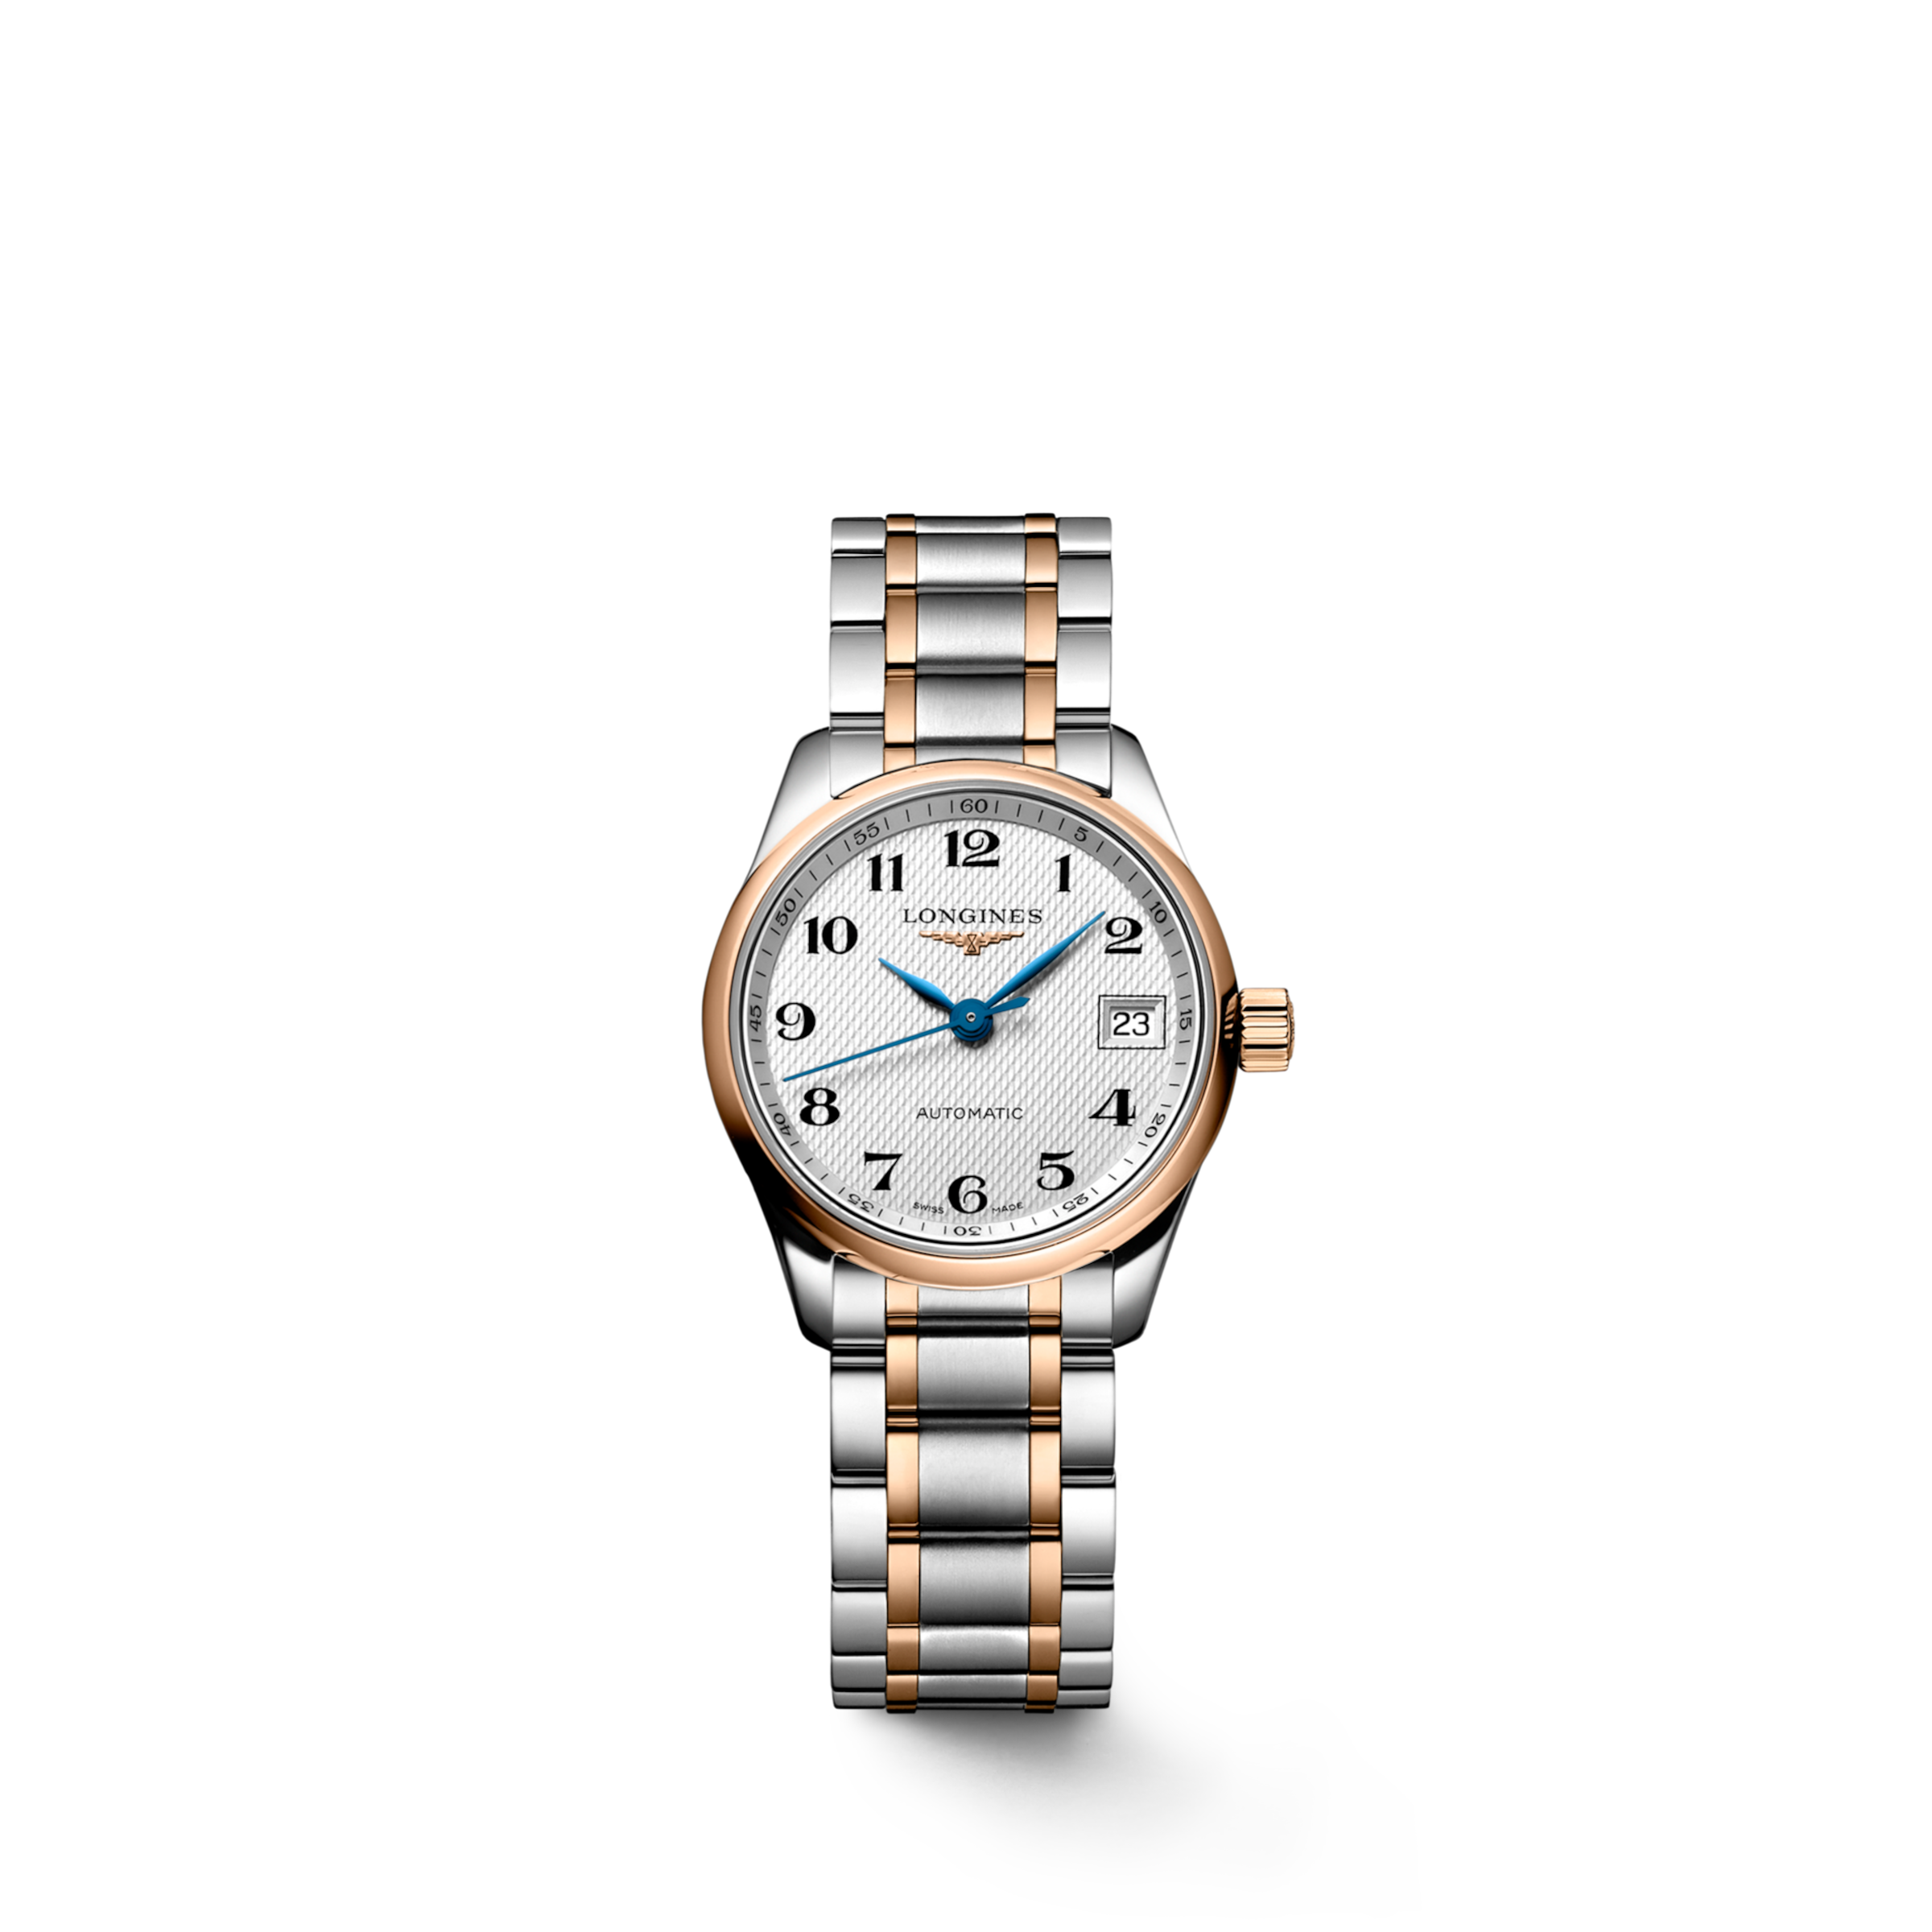 Longines MASTER COLLECTION Automatic Stainless steel and 18 karat pink gold Watch - L2.128.5.79.7